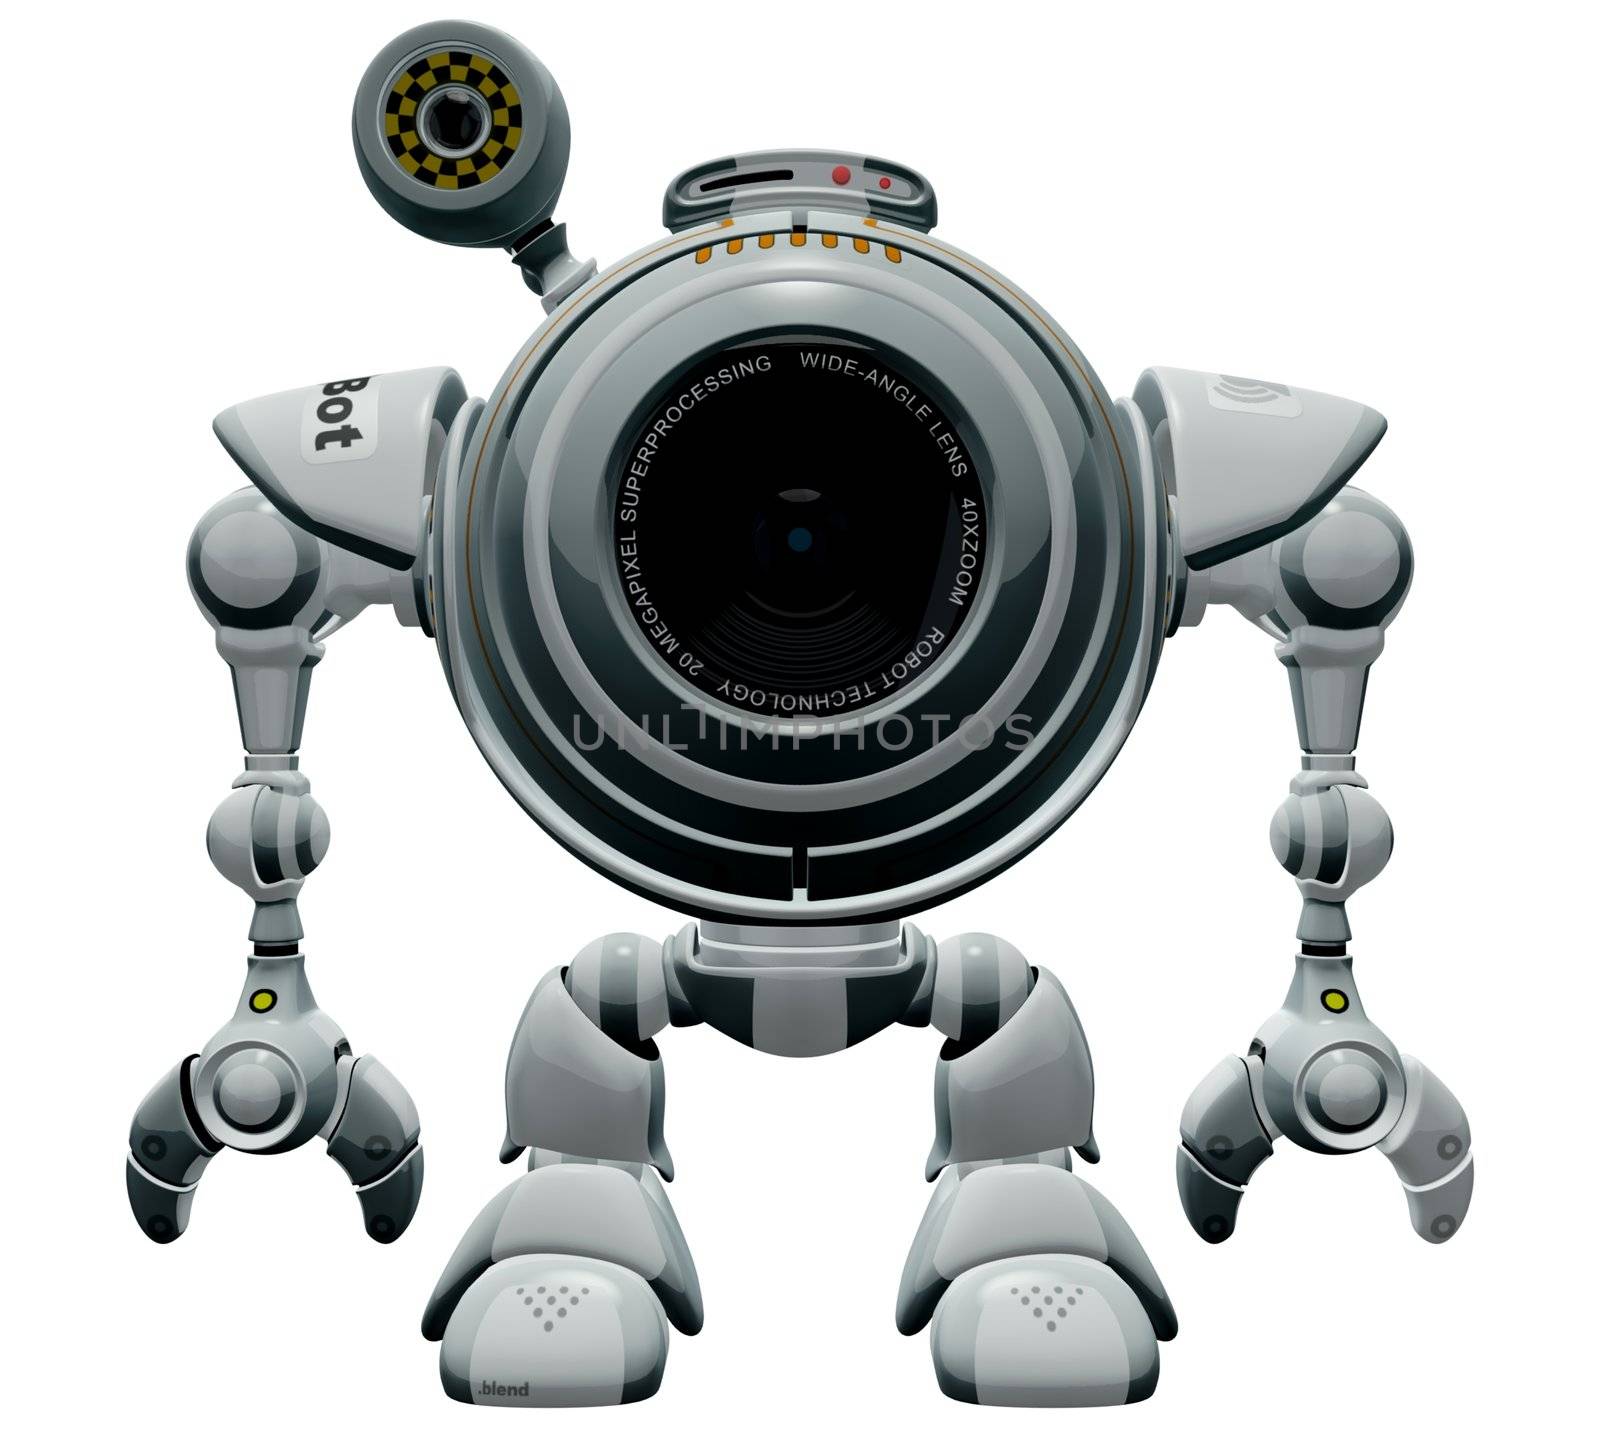 A 3d robot web cam looking straight and standing straight. The labels and markings on him are all fictional and made up. 